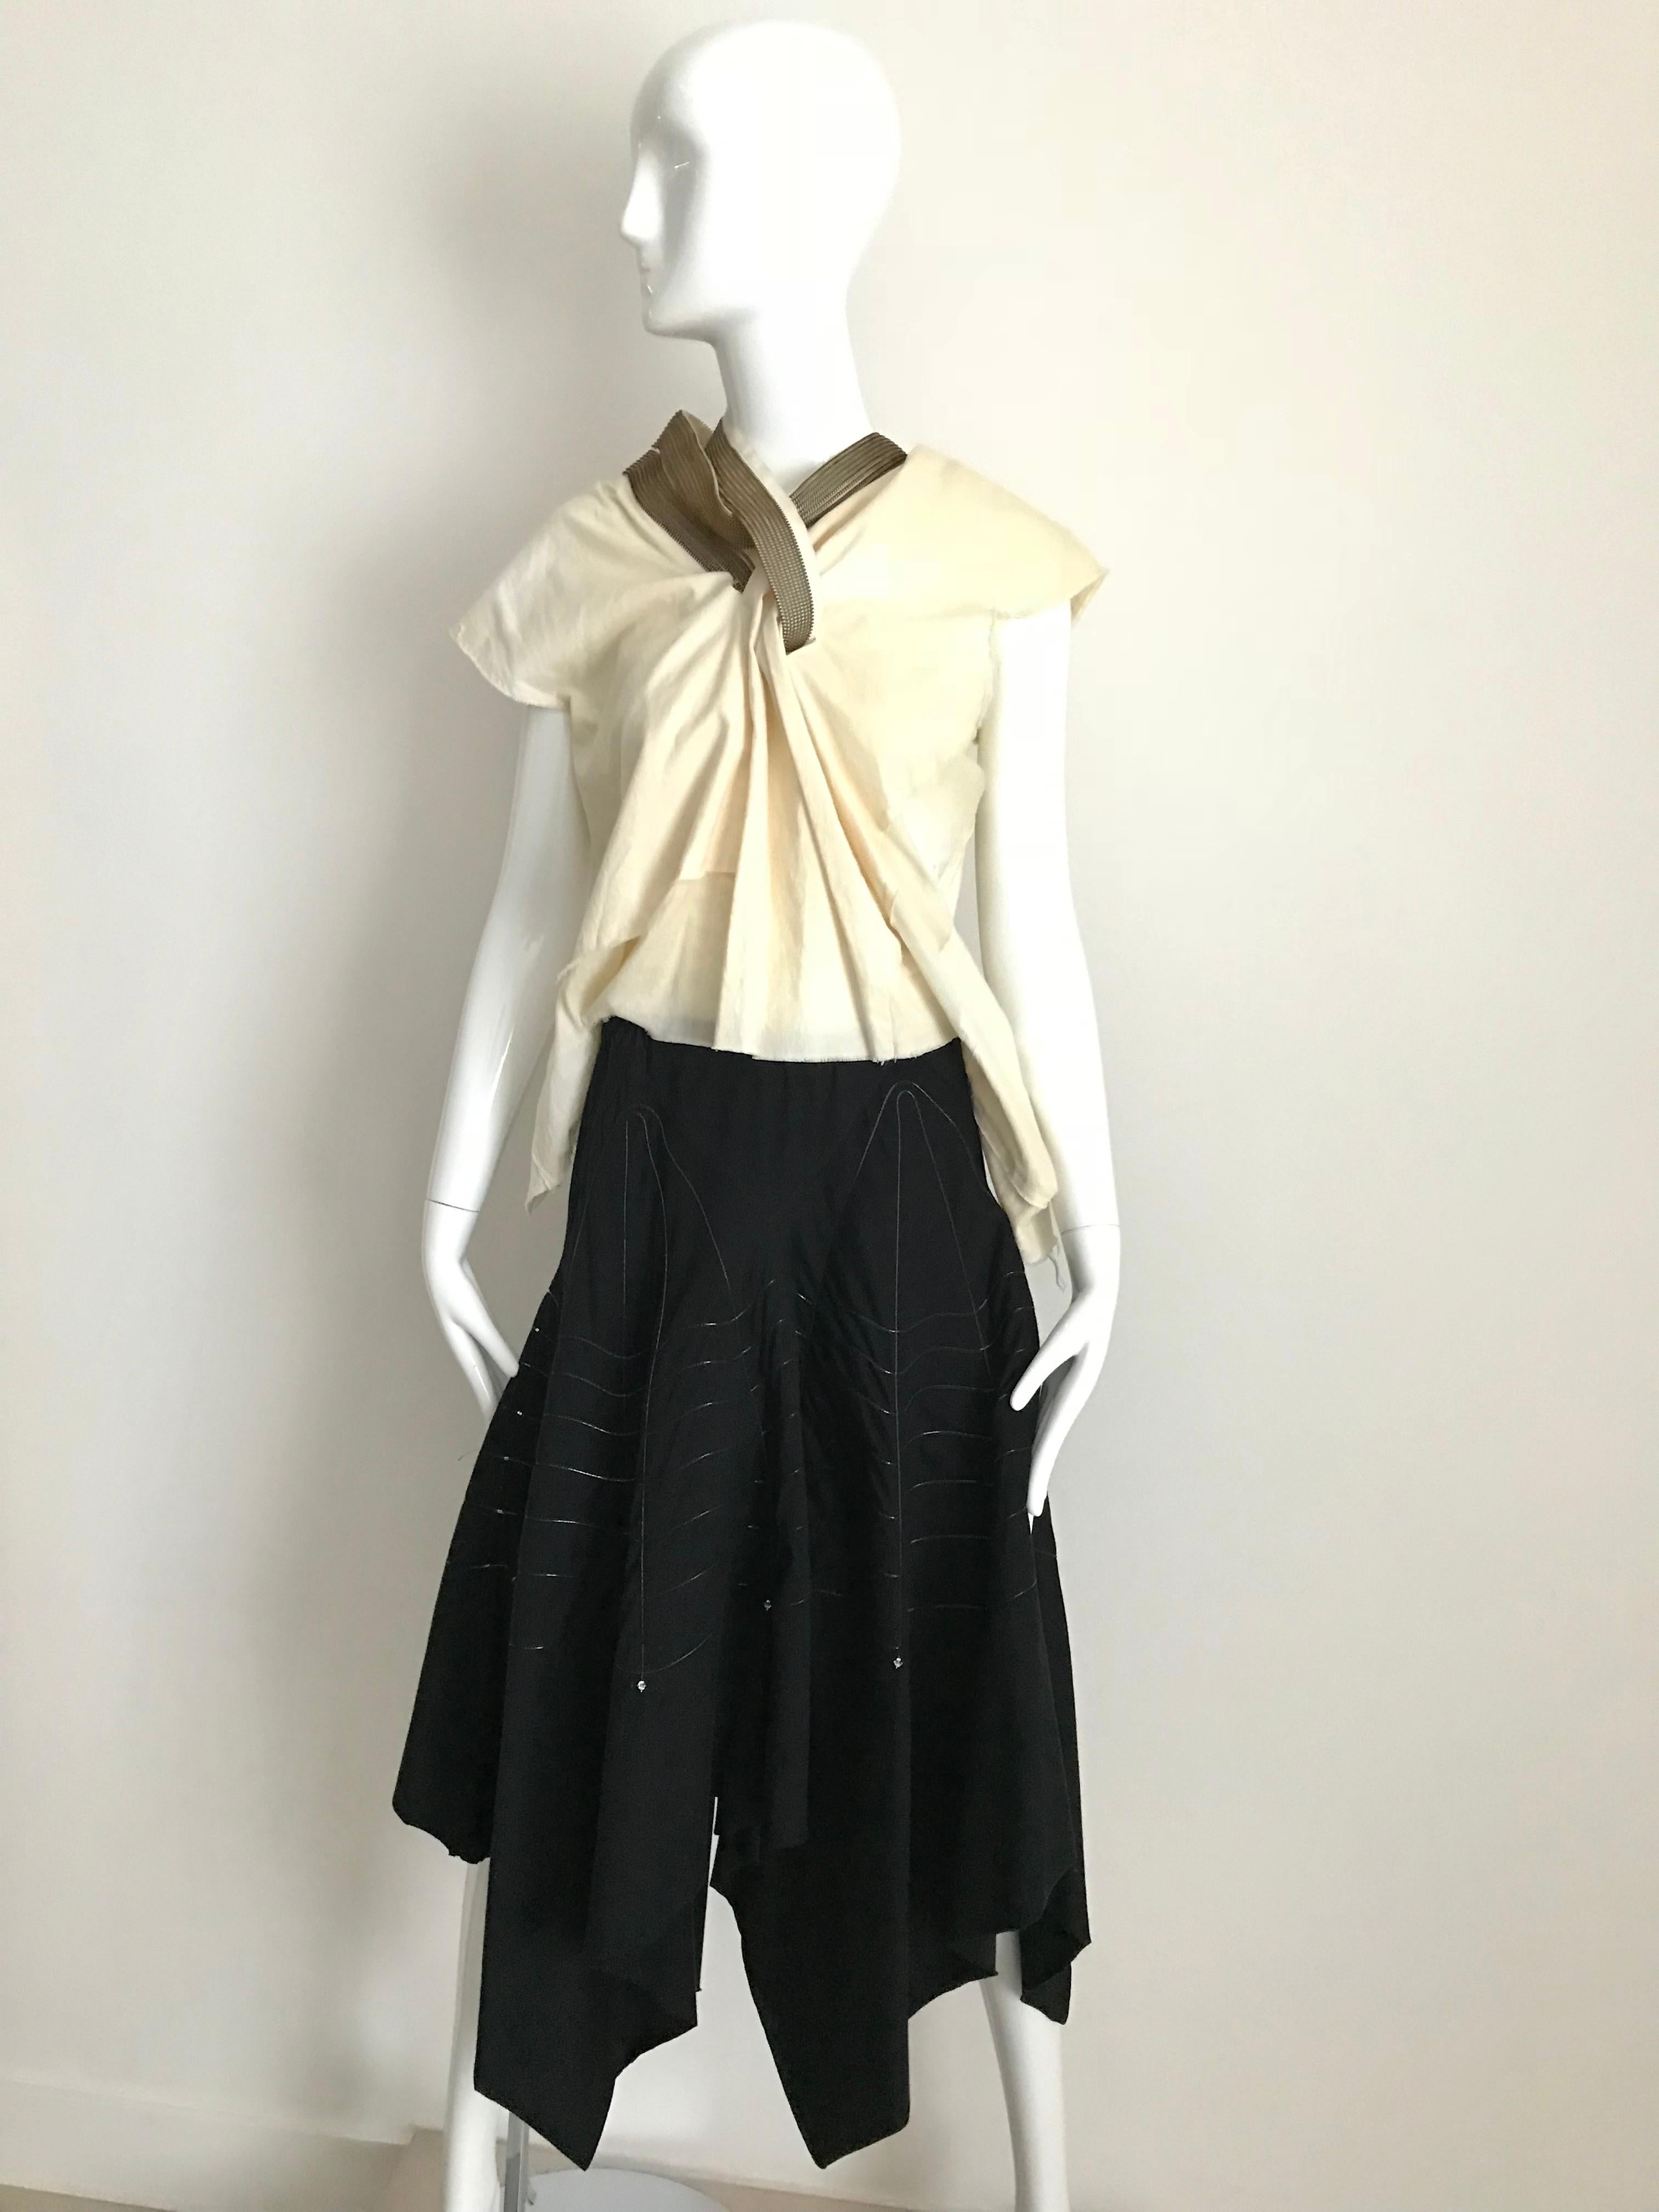 90s Issey Miyake black spider web  knit skirt with elastic waist. 
fit size : 2,4/6/8
Measurement:
W: 26